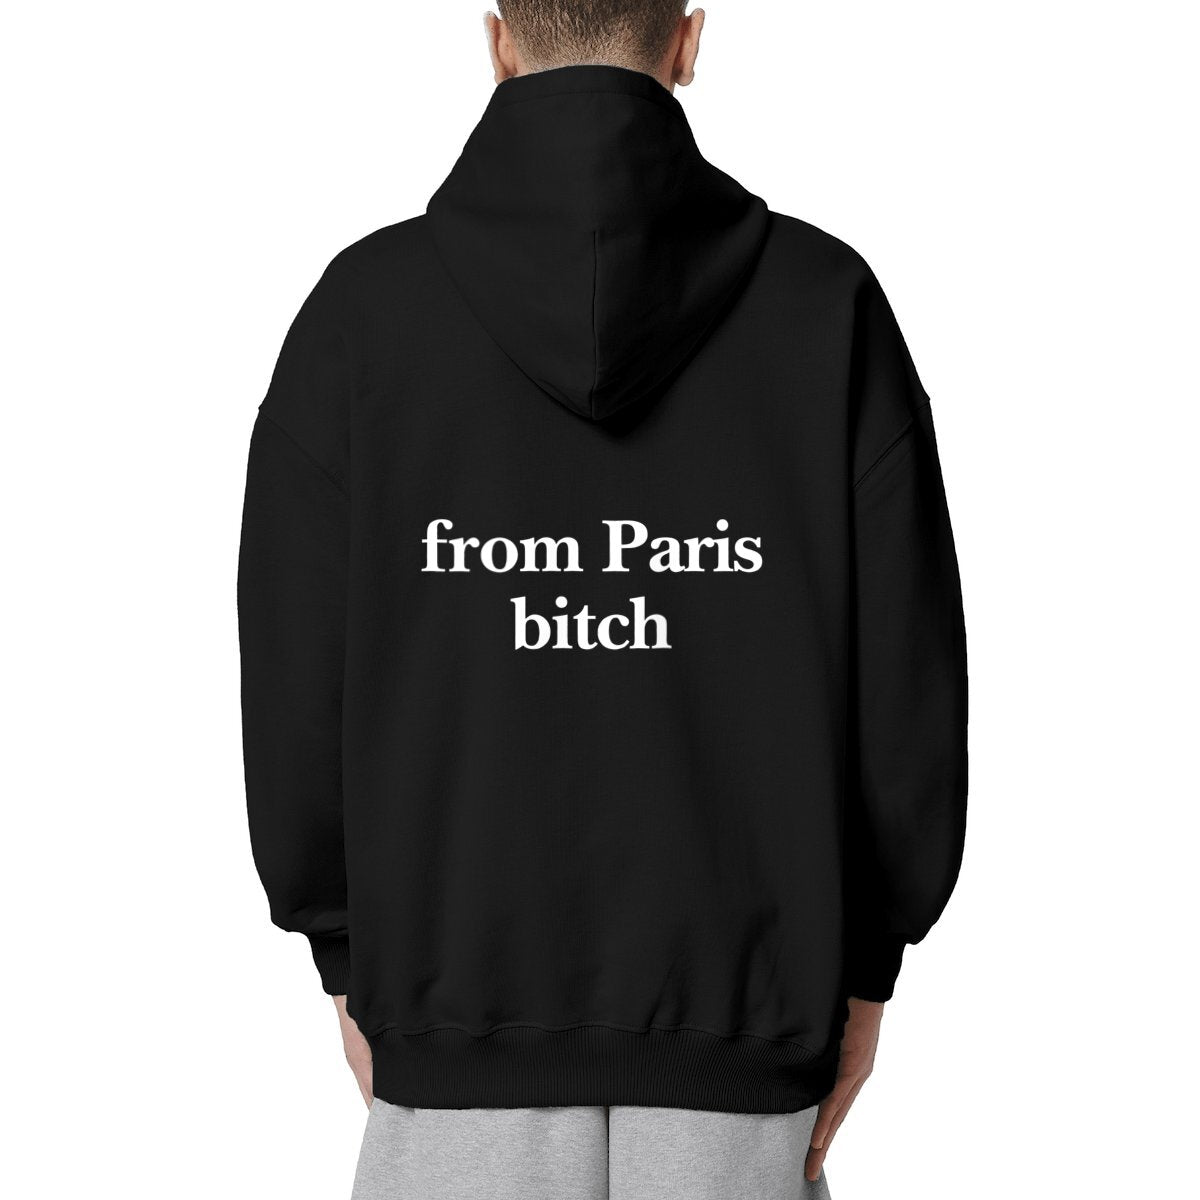 from paris bitch hoodie.garçon garçon essentiel black oversized hoodie. Encapsulate effortless Parisian cool with this hoodie, its subtle 'FROM PARIS BITCH ON THE BACK' emblem whispering understated sophistication. Crafted for comfort, styled for streets of Paris.